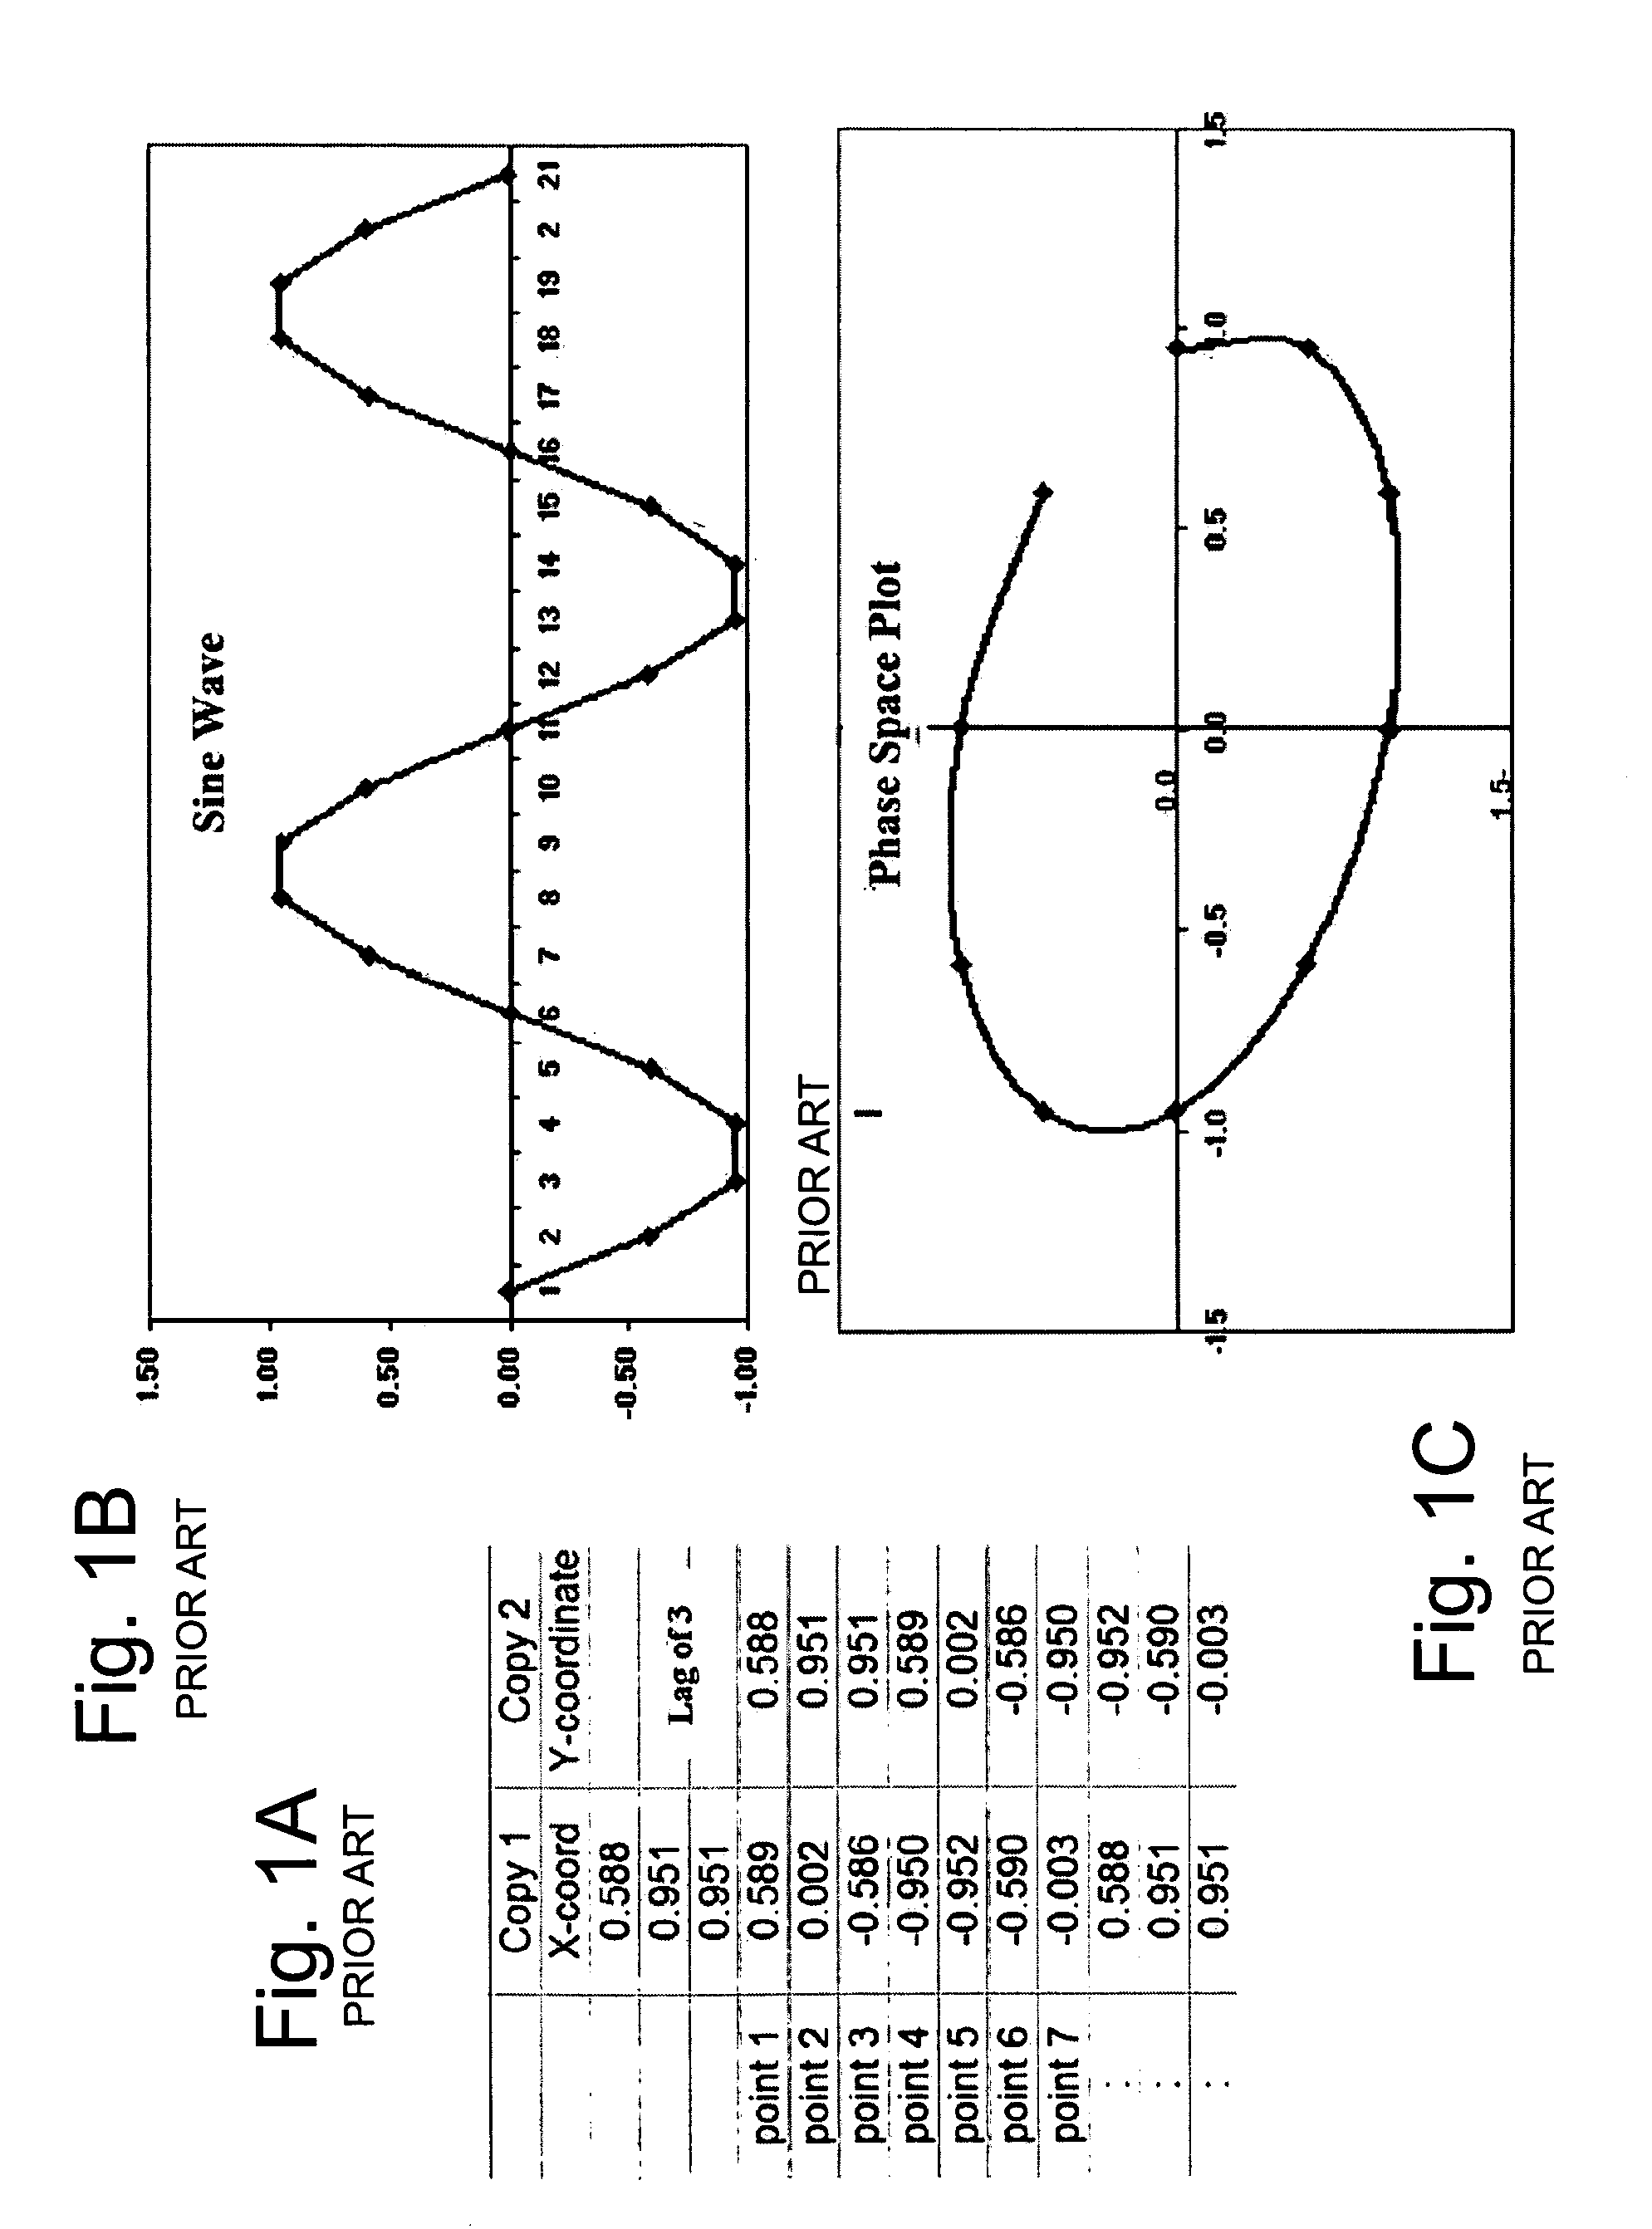 Devices, systems and methods for characterization of ventricular fibrillation and for treatment of ventricular fibrillation